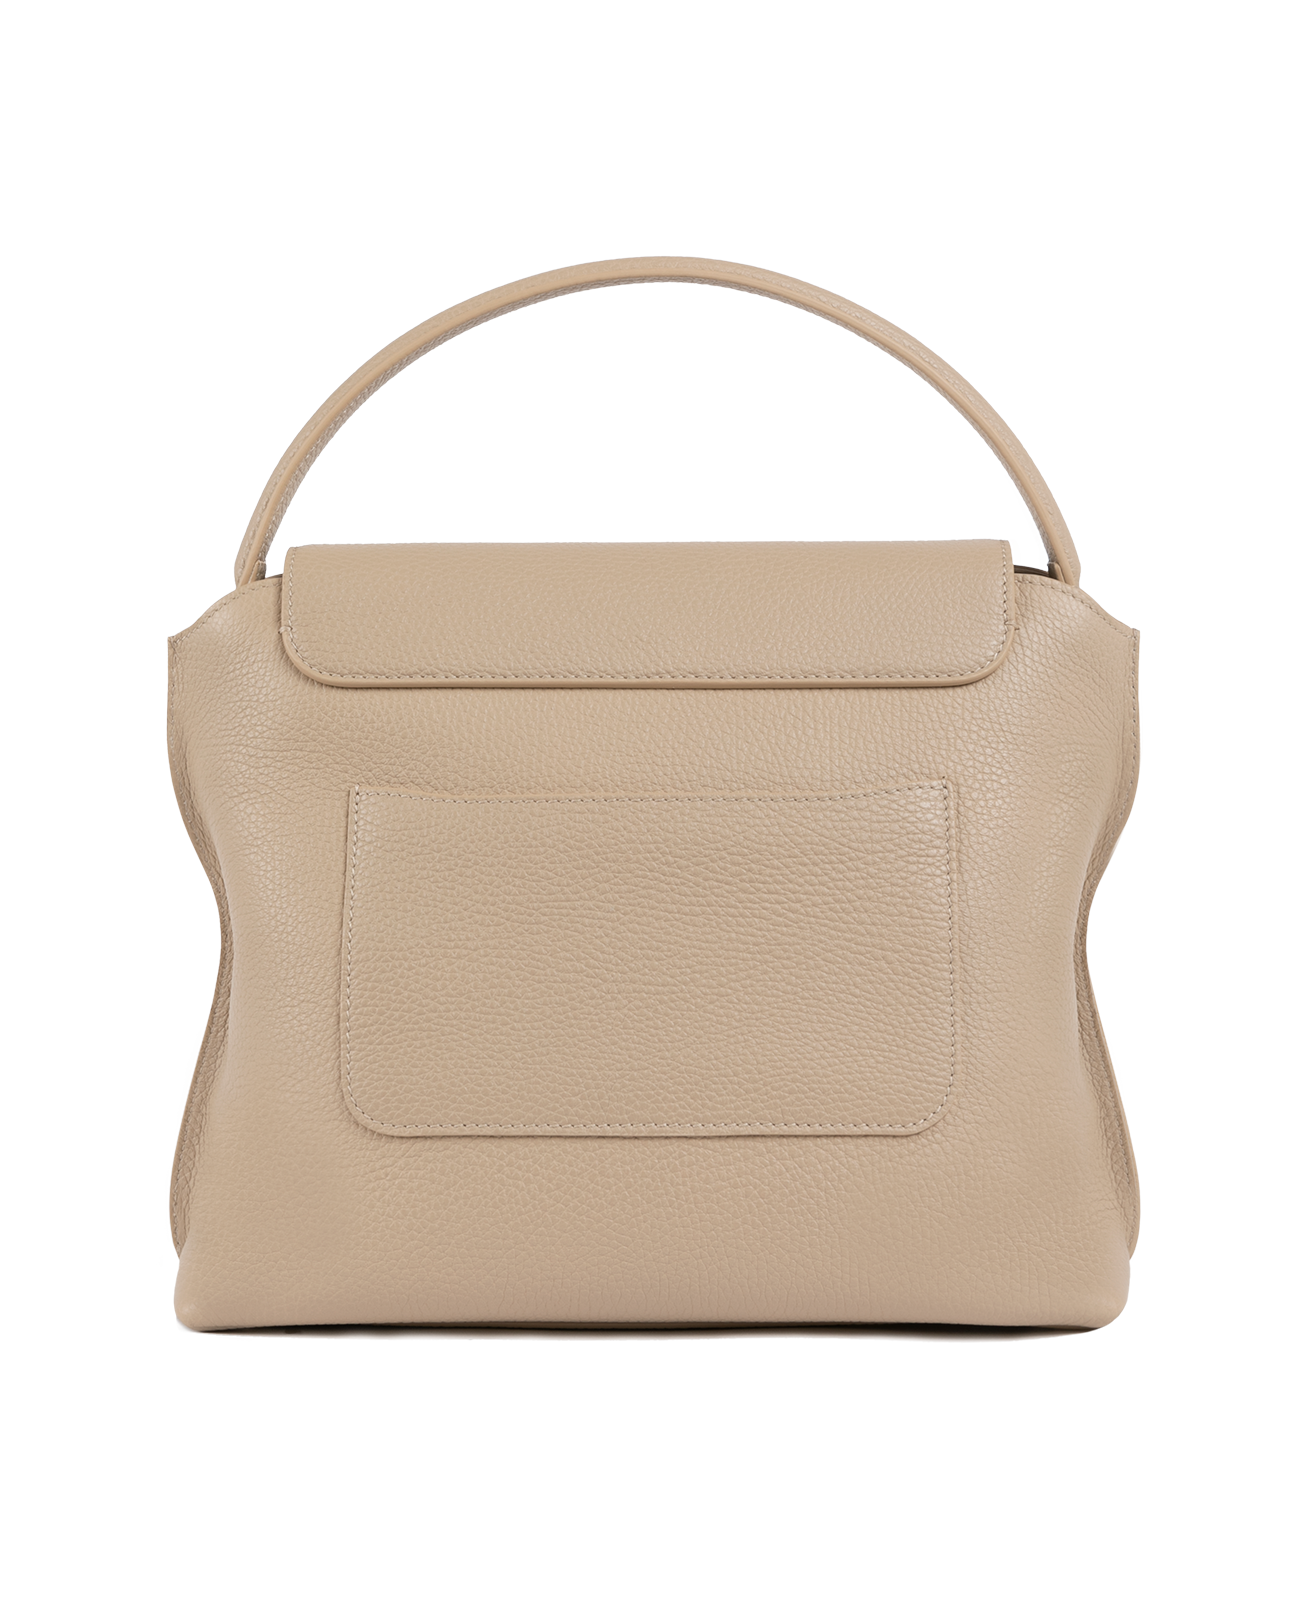 Cross-body bag in Italian full-grain leather, semi-aniline calf Italian leather with detachable shoulder strap.Three compartments, zip pocket in the back compartment. Magnetic flap closure with logo. Color: Nude. Size: Large